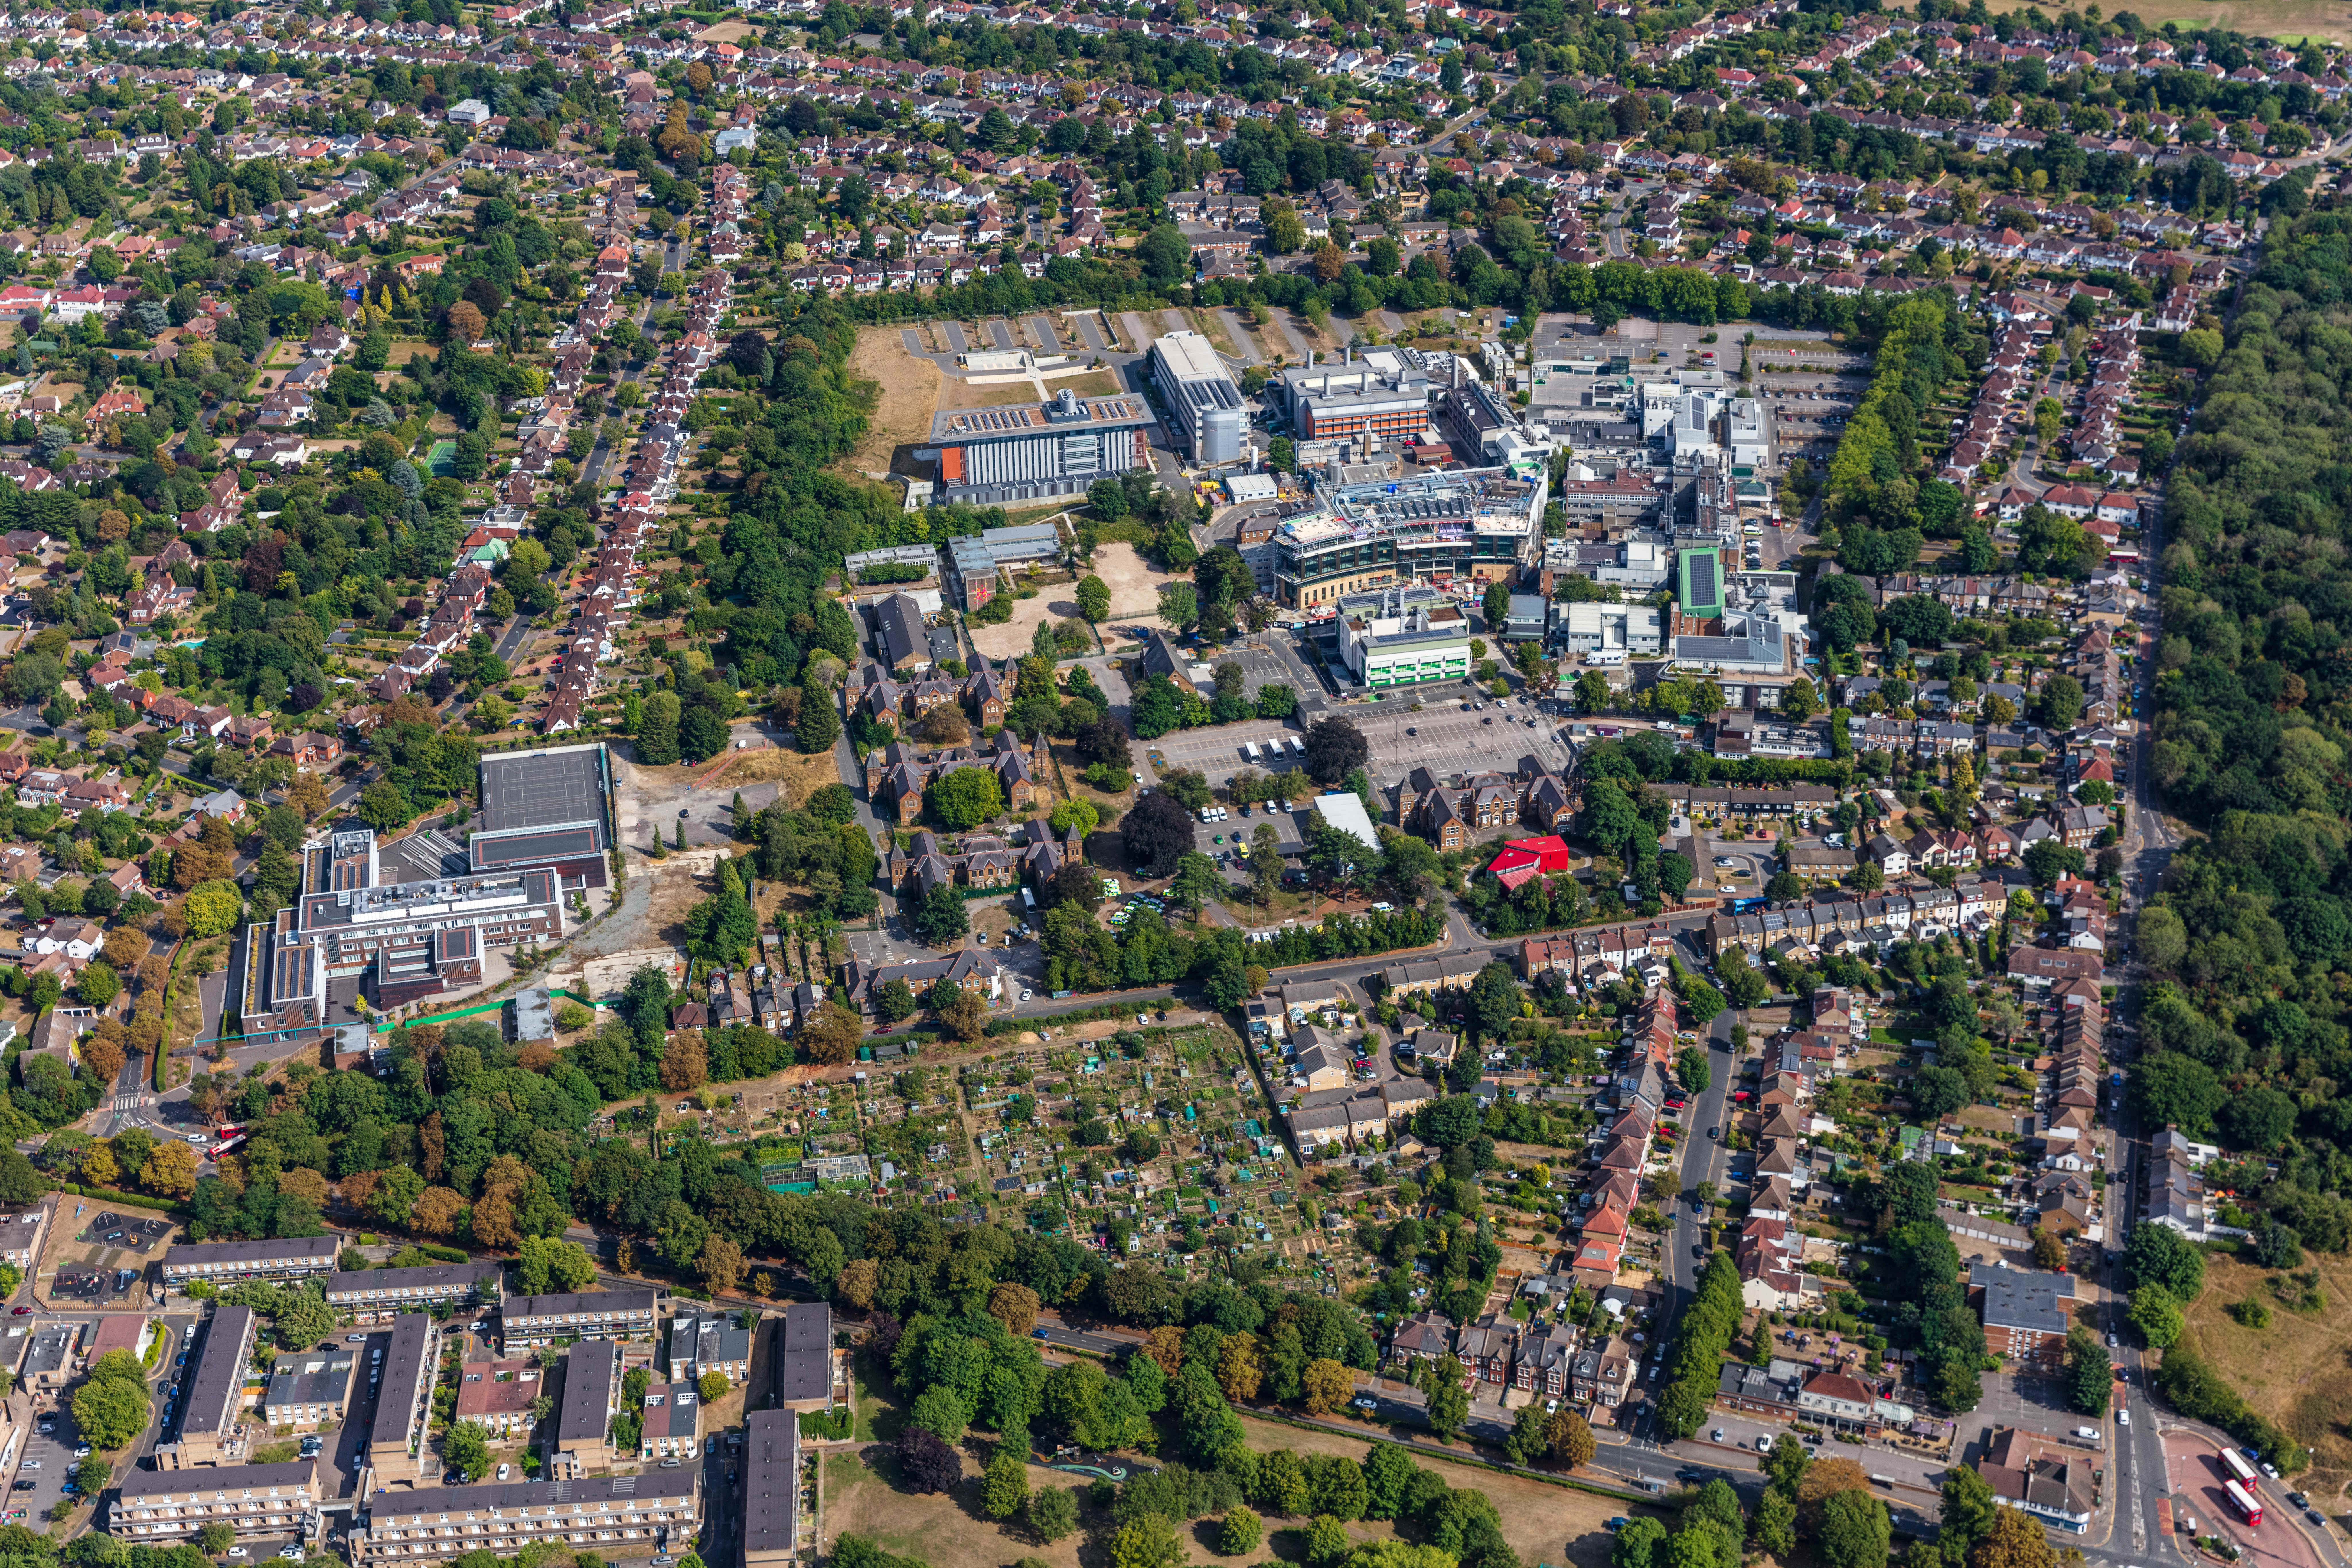 Aerial image of the London Cancer Hub district